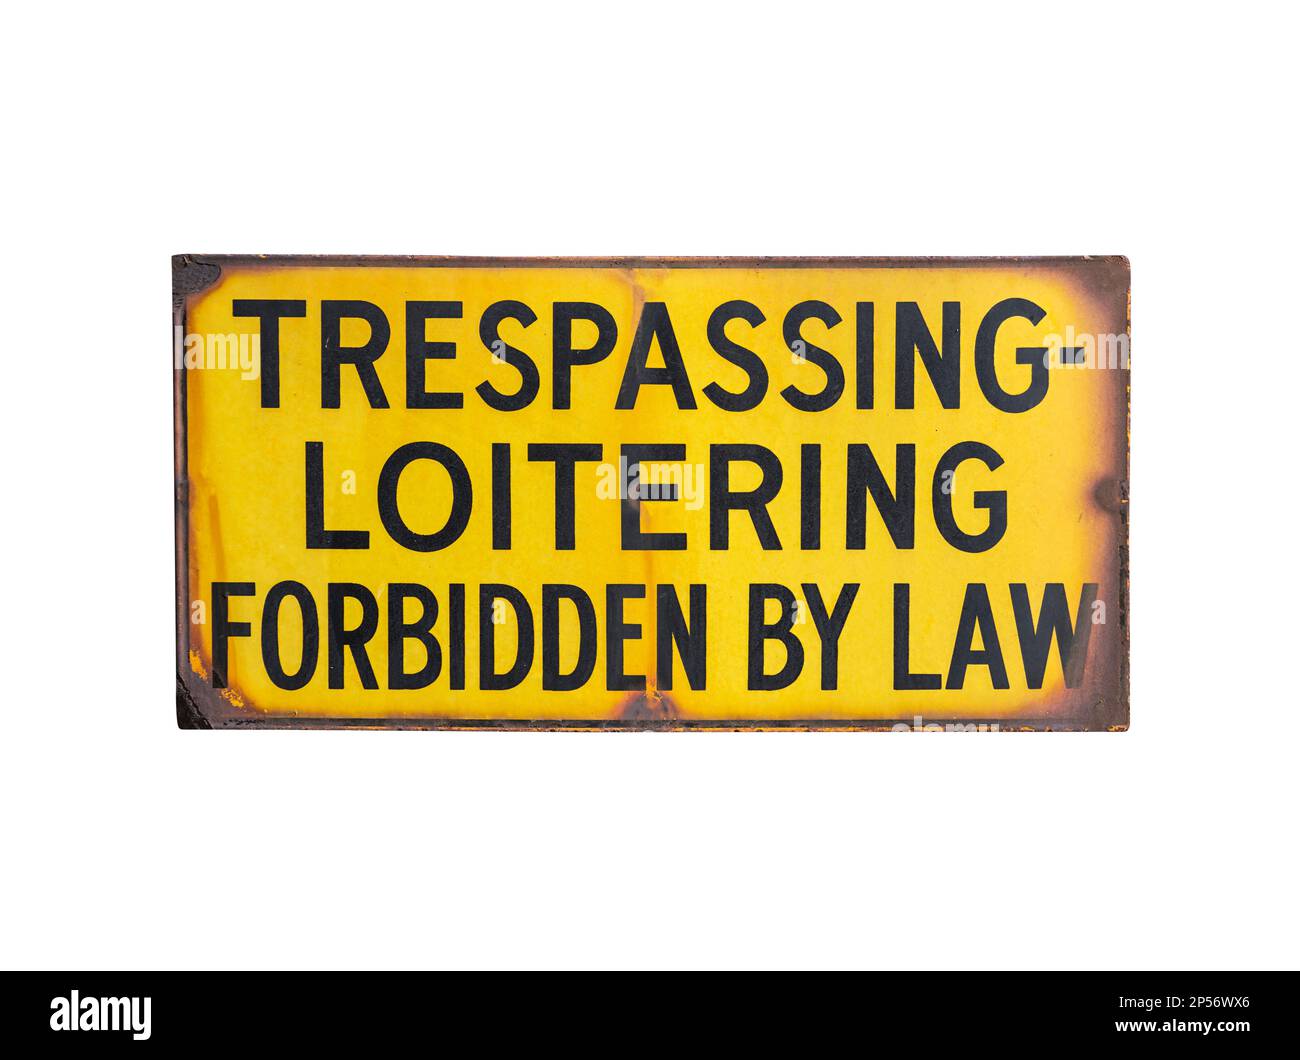 Rusty old trespassing and loitering forbidden by law sign.  Isolated with cut out background. Stock Photo